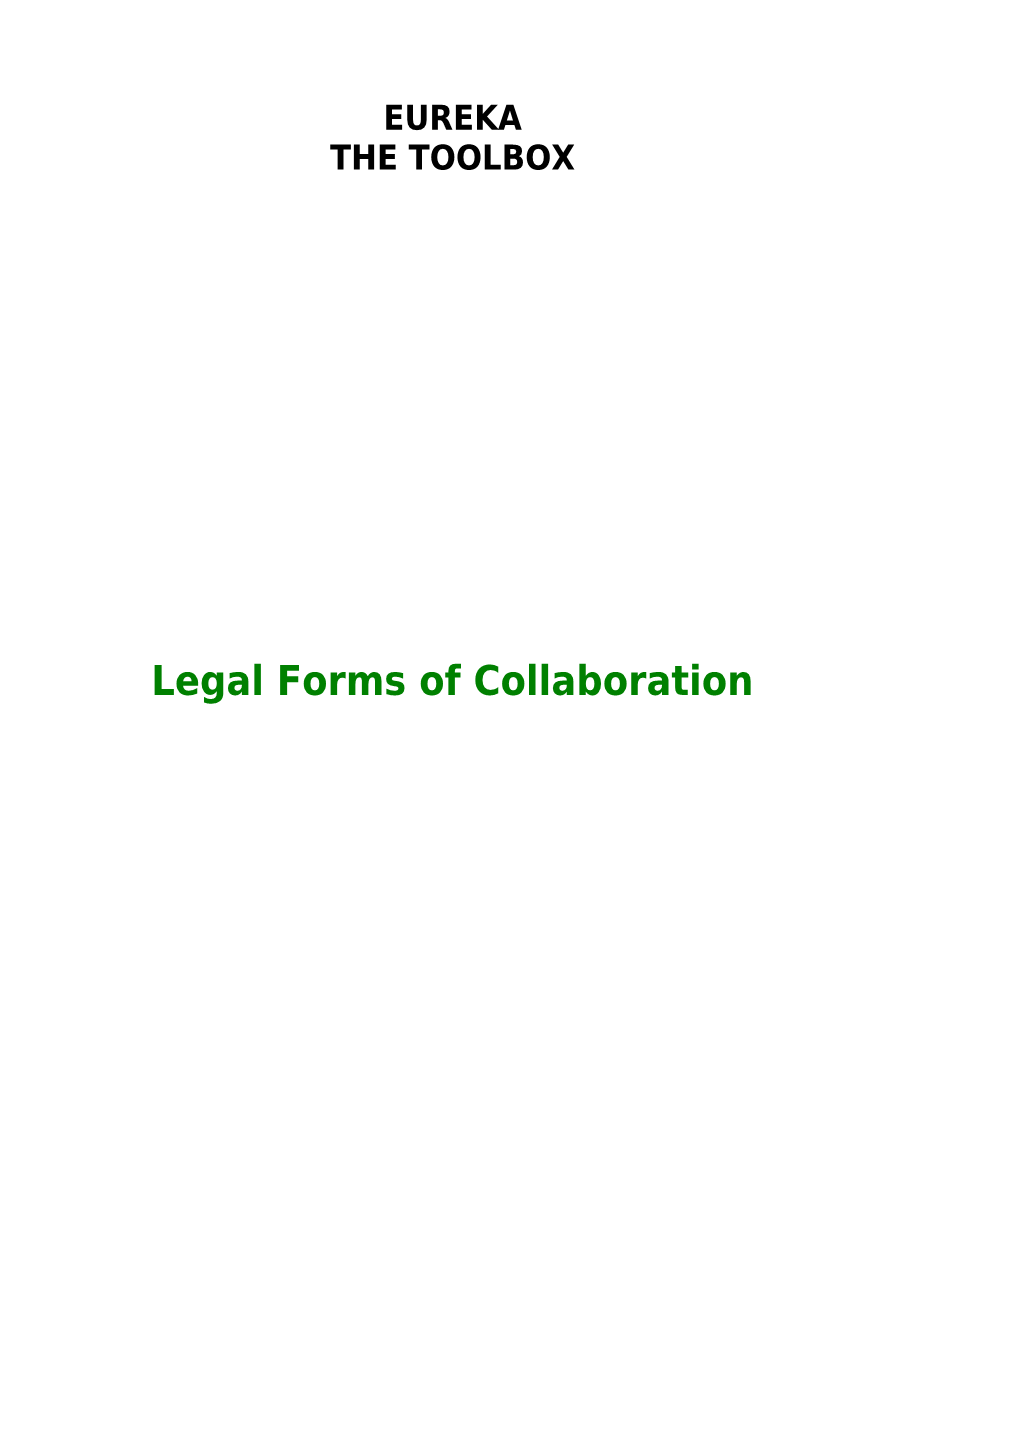 Legal Forms of Collaboration TABLE of CONTENTS